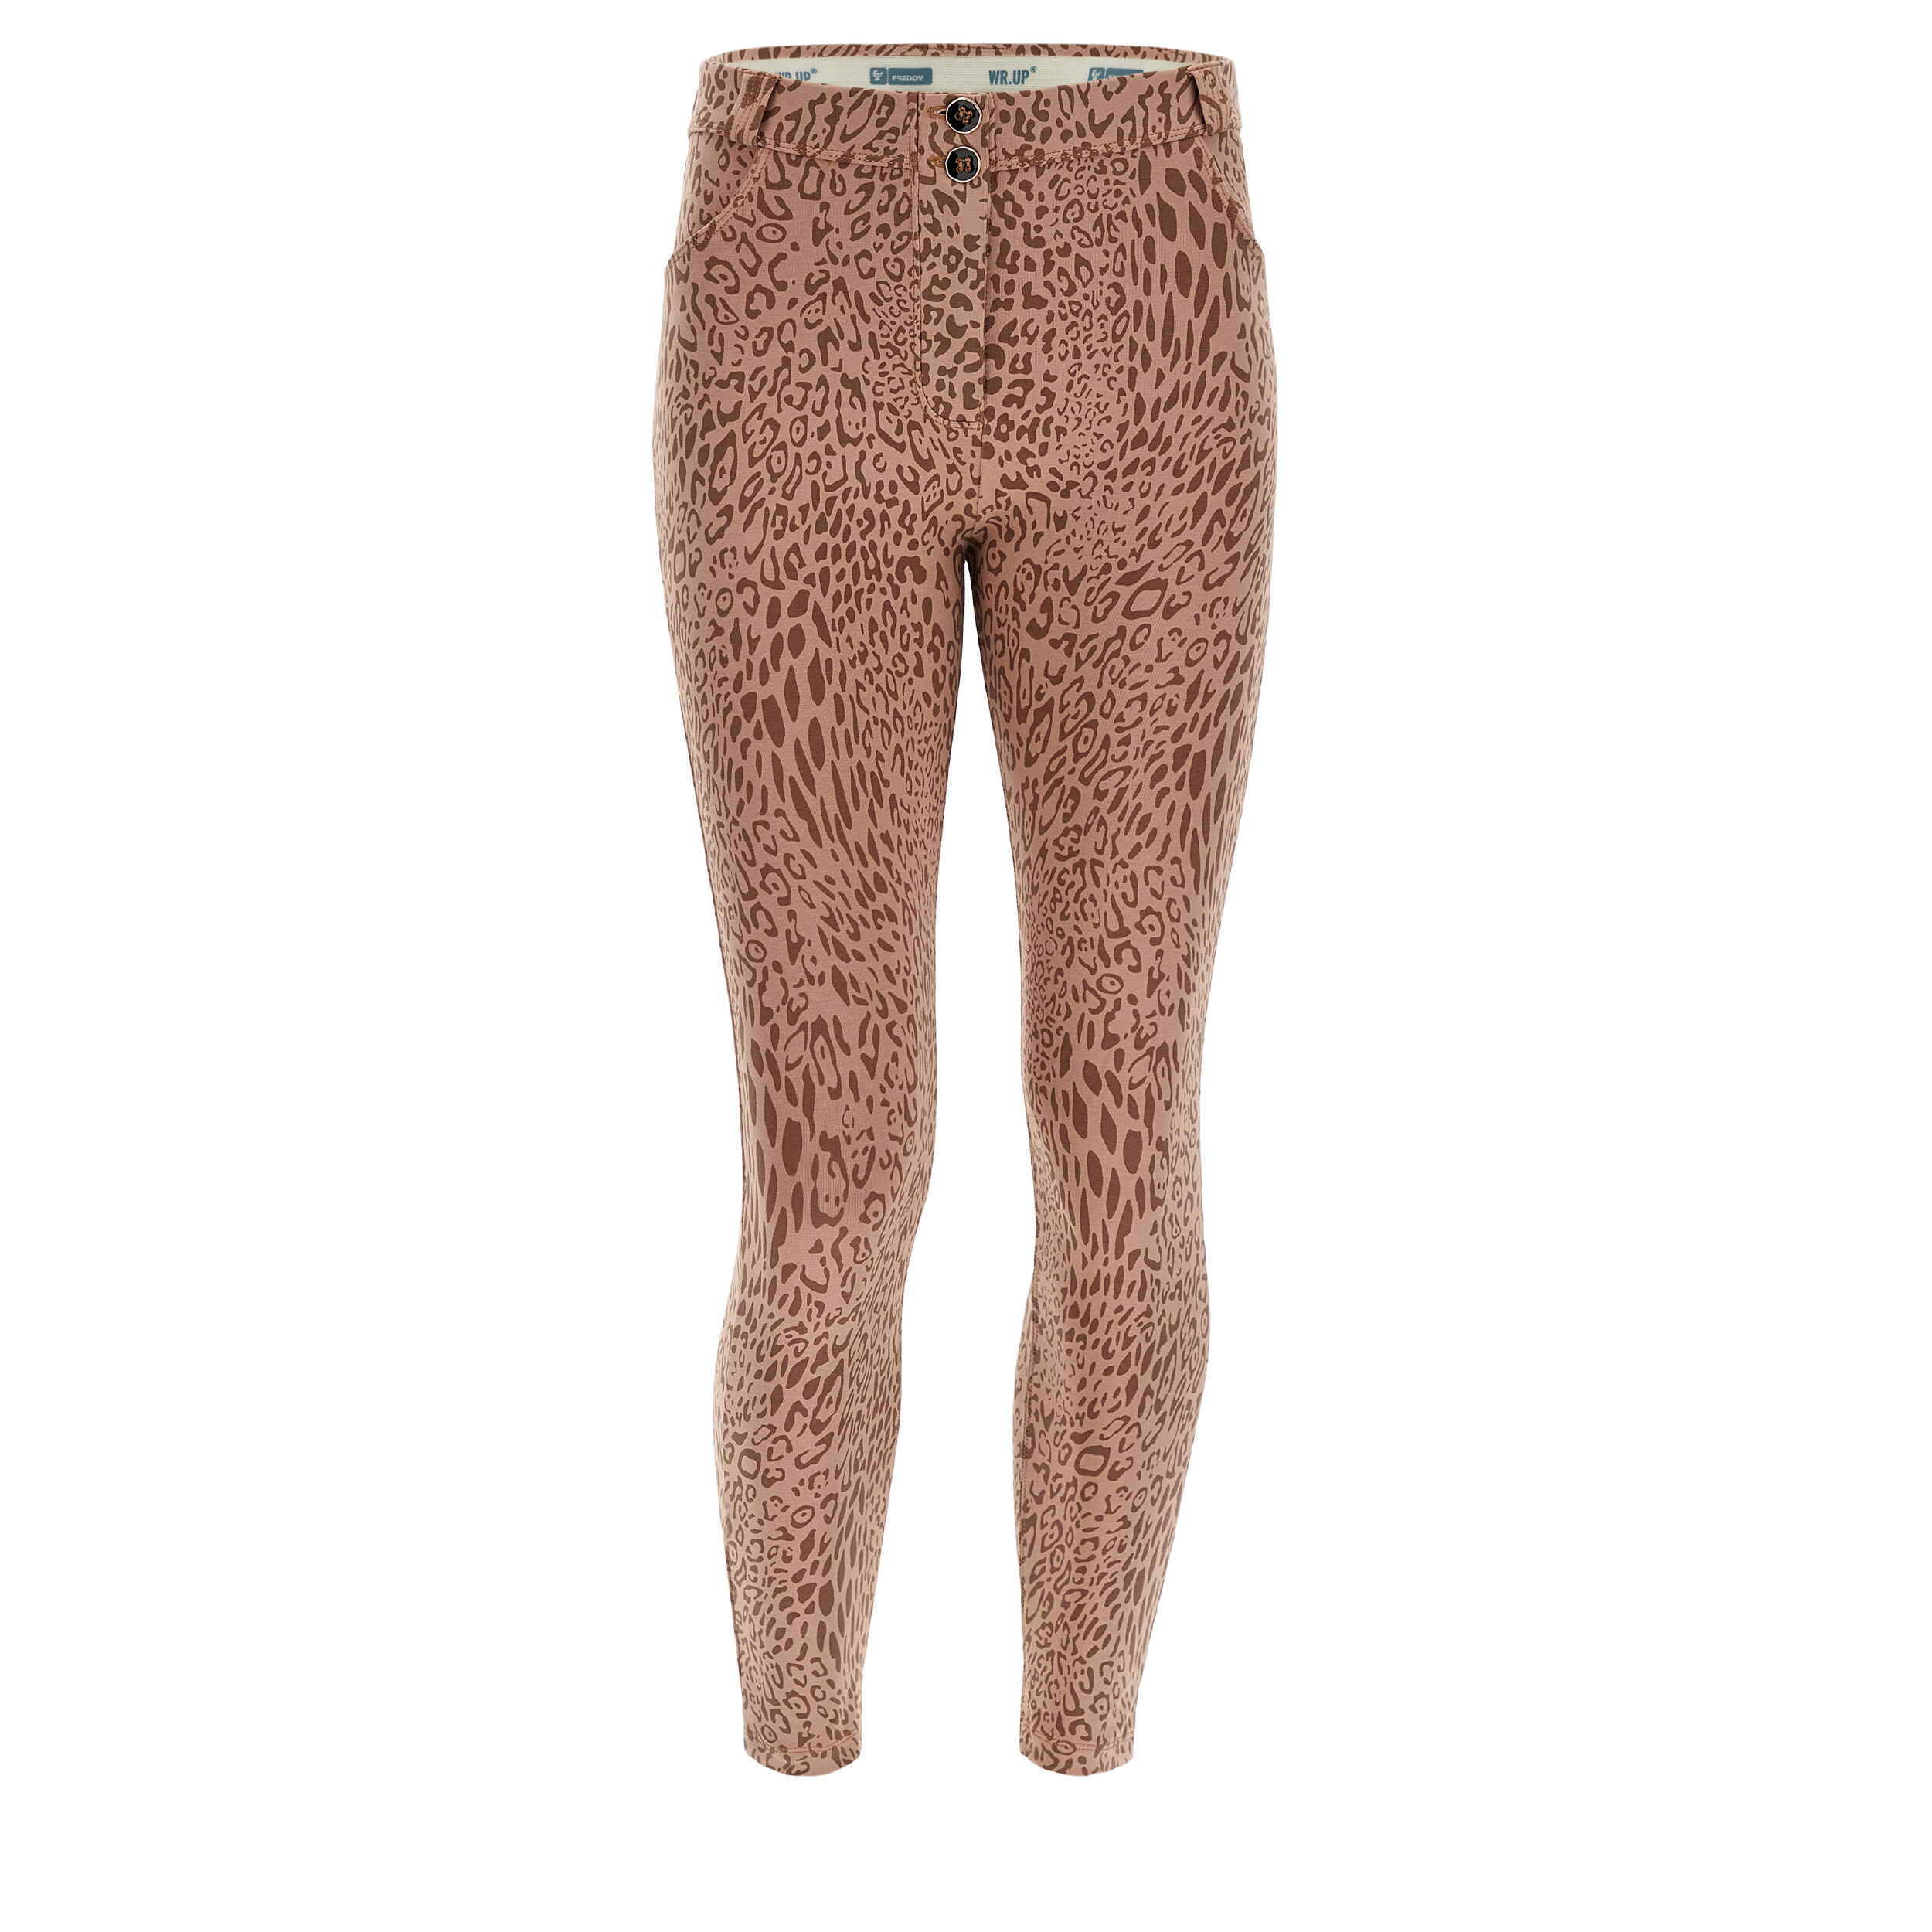 Freddy Pantaloni WR.UP® vita alta in cotone stampato animalier Animalier Allover Pink Dyed Donna Extra Large